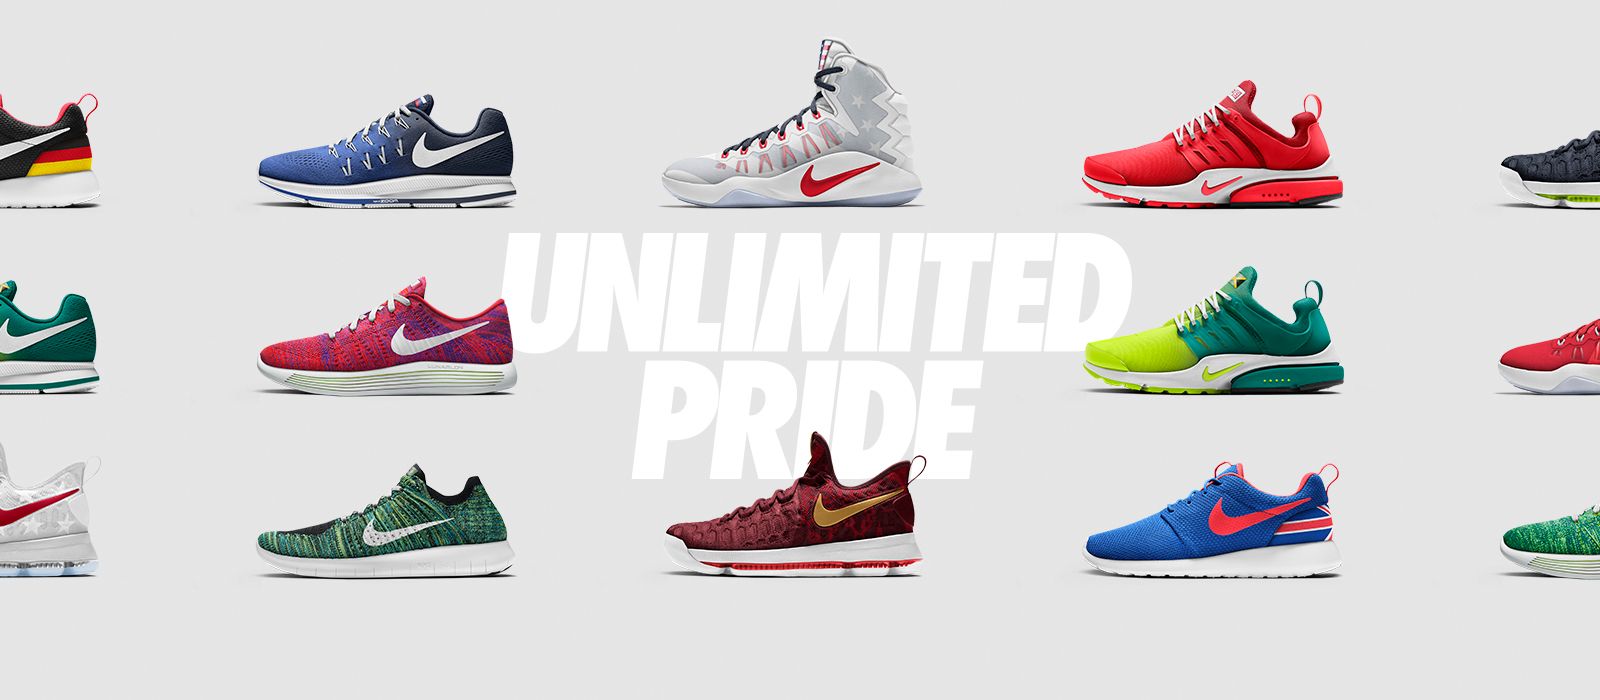 NIKEiD Pride Unlimited Collection